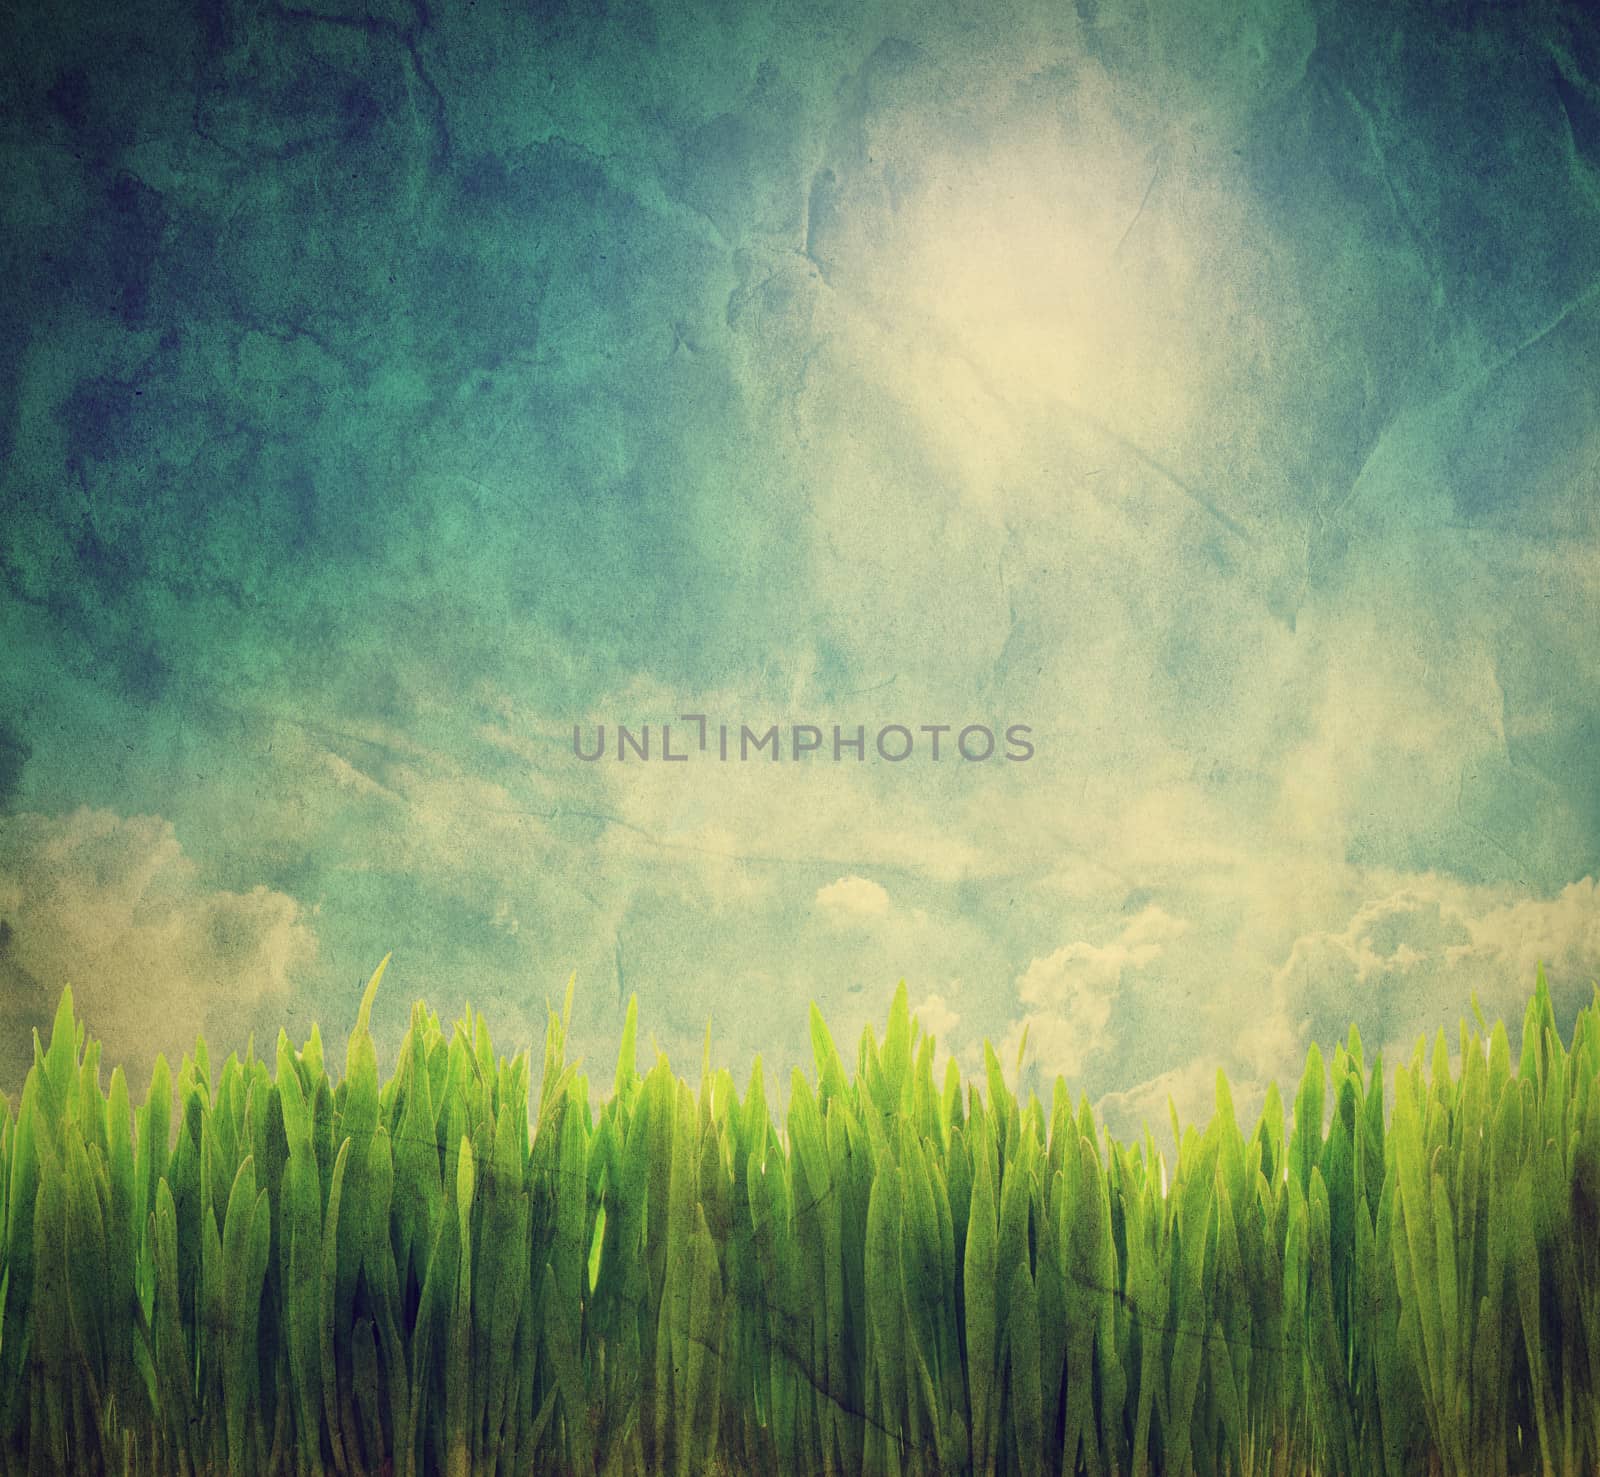 Vintage, retro image of nature landscape. Grunge canvas texture by photocreo